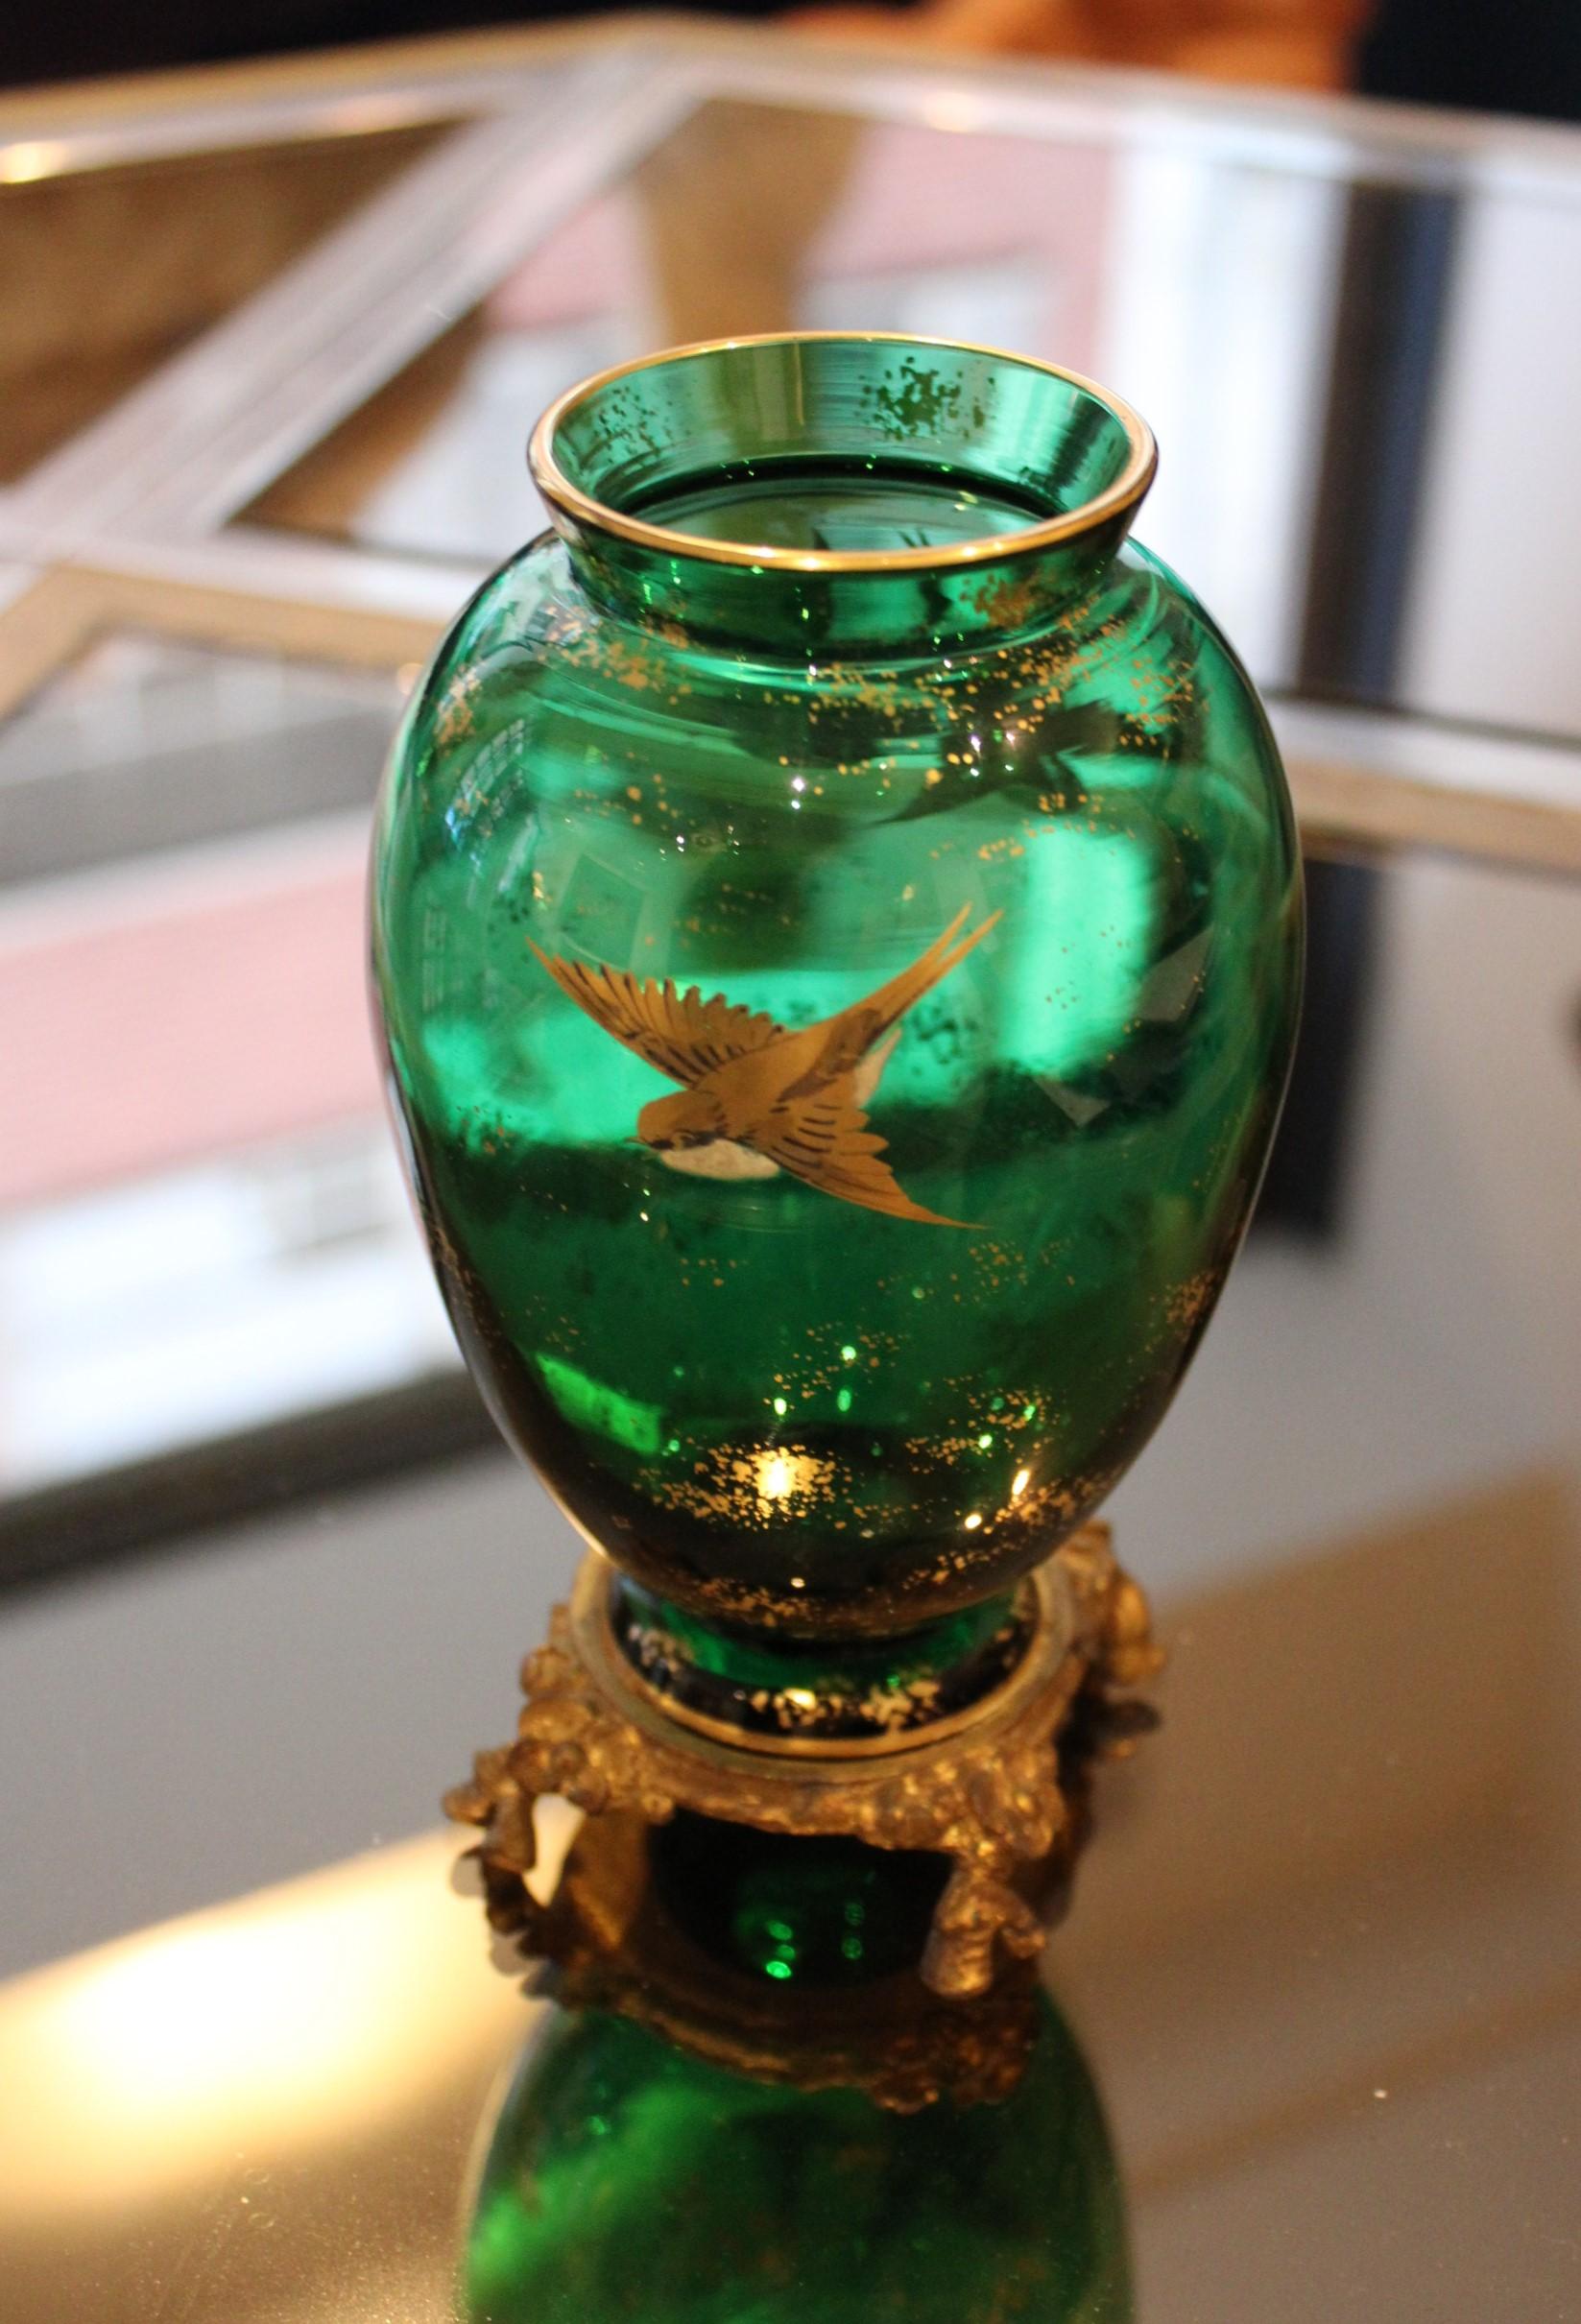 Glass vase on a carved metal mount
Green color, decorated with birds
Early 20th century.